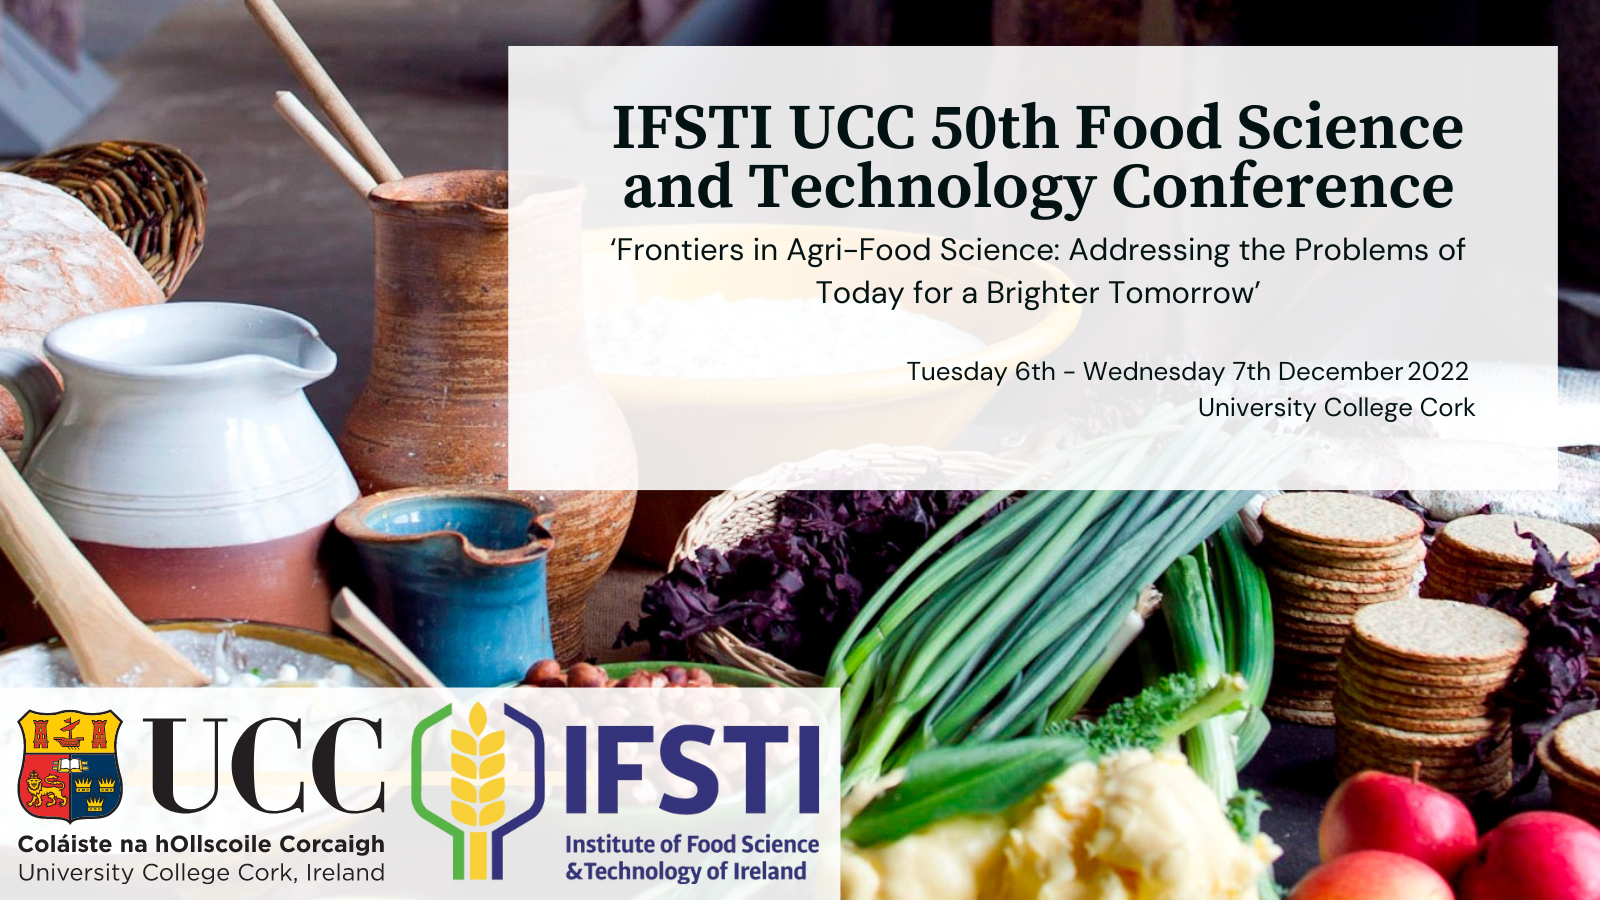 UCC/IFSTI 50th Food Science and Technology Conference - 6&7Dec 2022